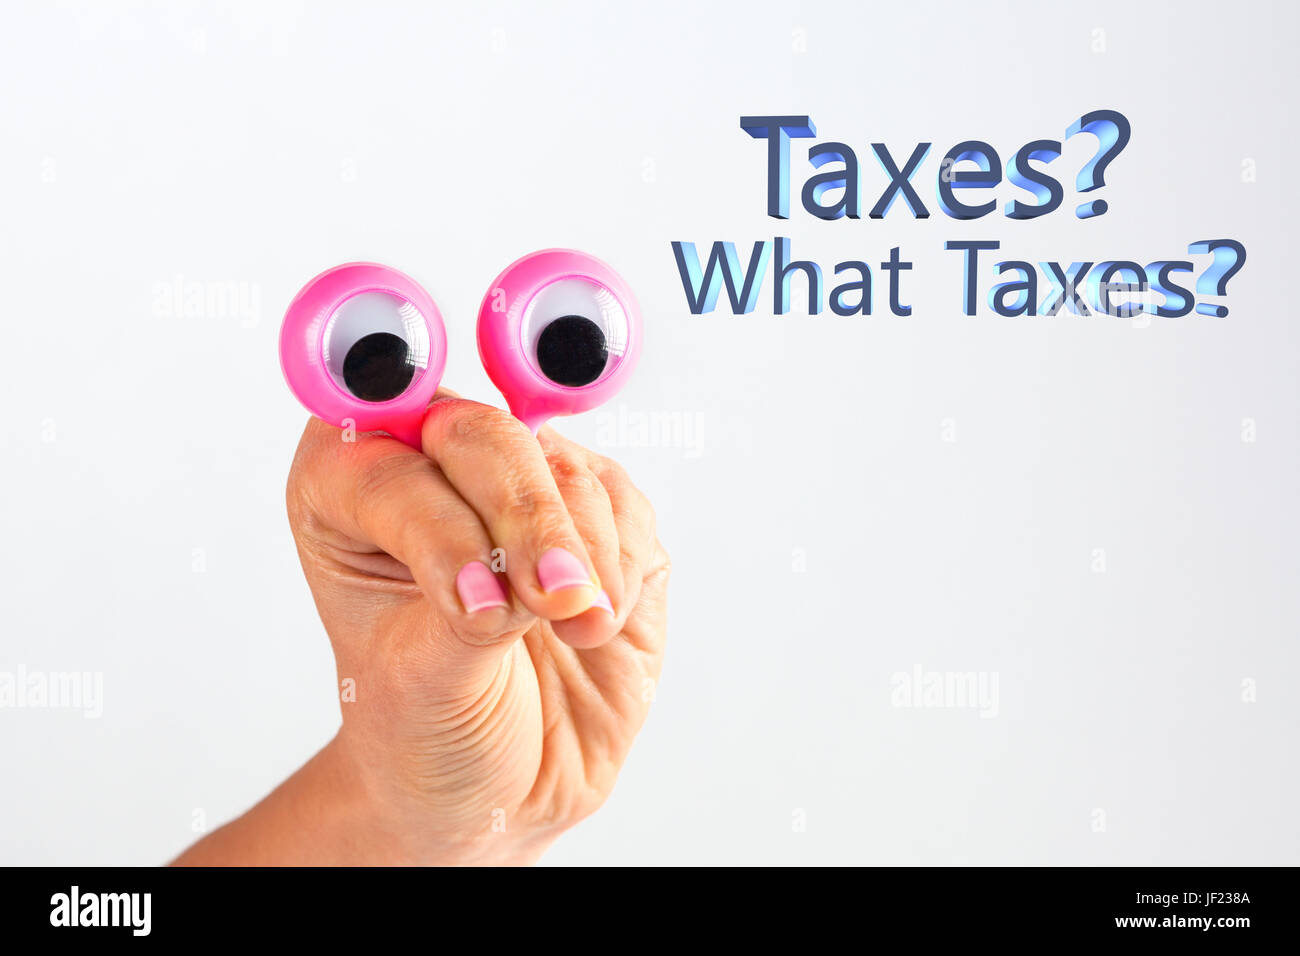 Funny character creature looking surprised and amused depicted with female hand and googly eyes with text Taxes? What Taxes? Tax avoidance concept Stock Photo